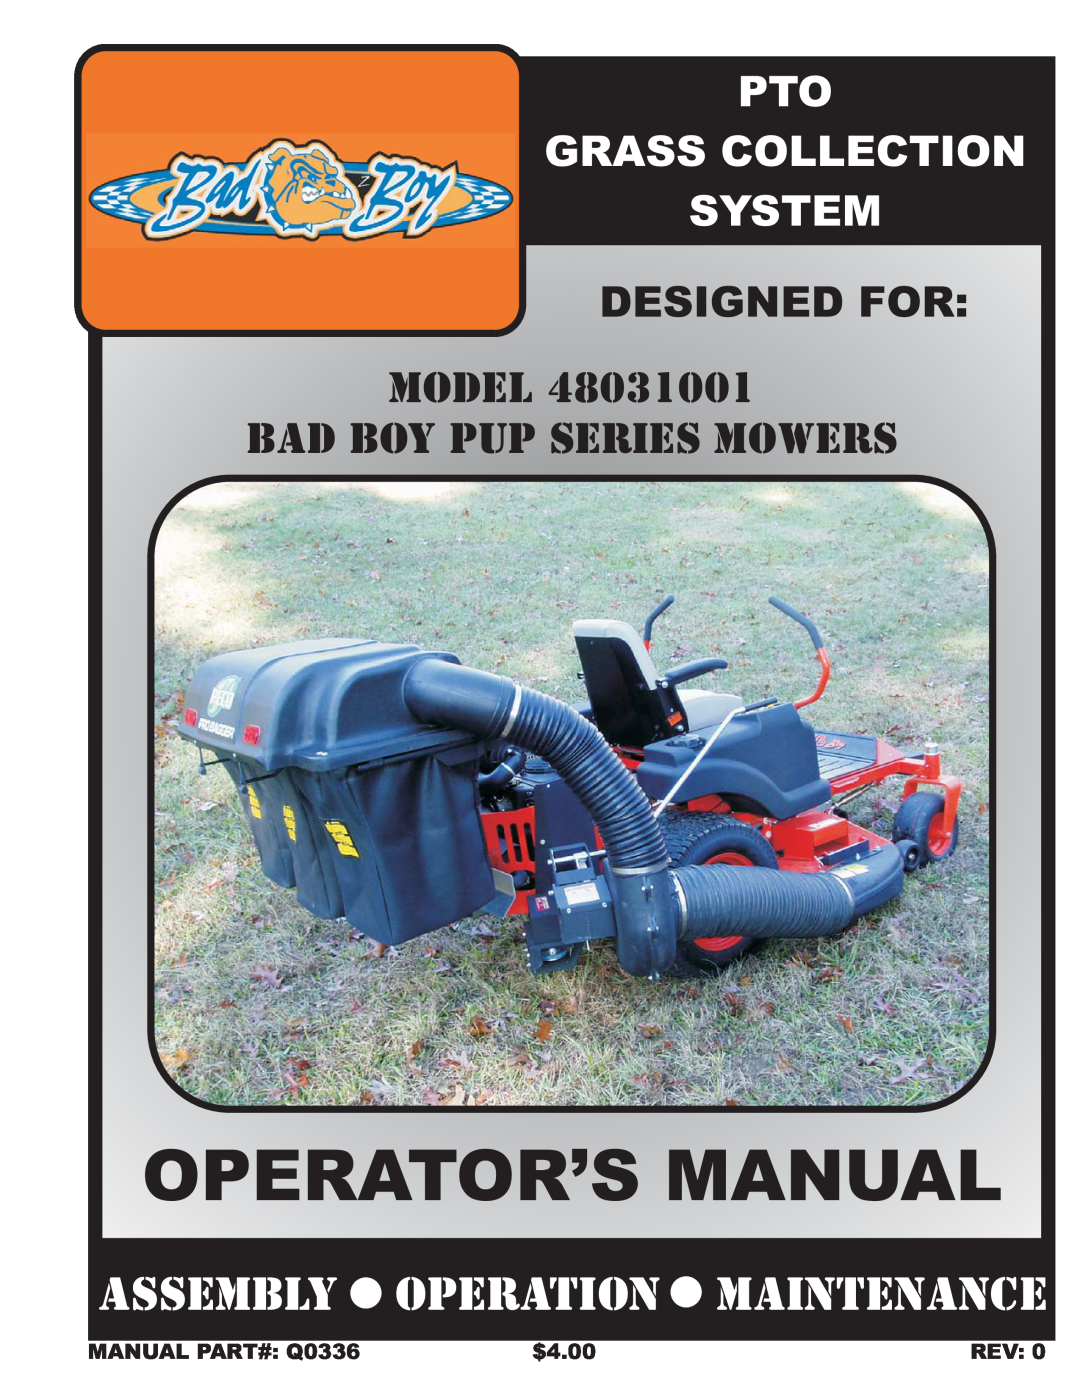 Bad Boy Mowers PUP Series manual Designed For, MANUAL PART# Q0336, $4.00, Operator’S Manual, Pto Grass Collection System 